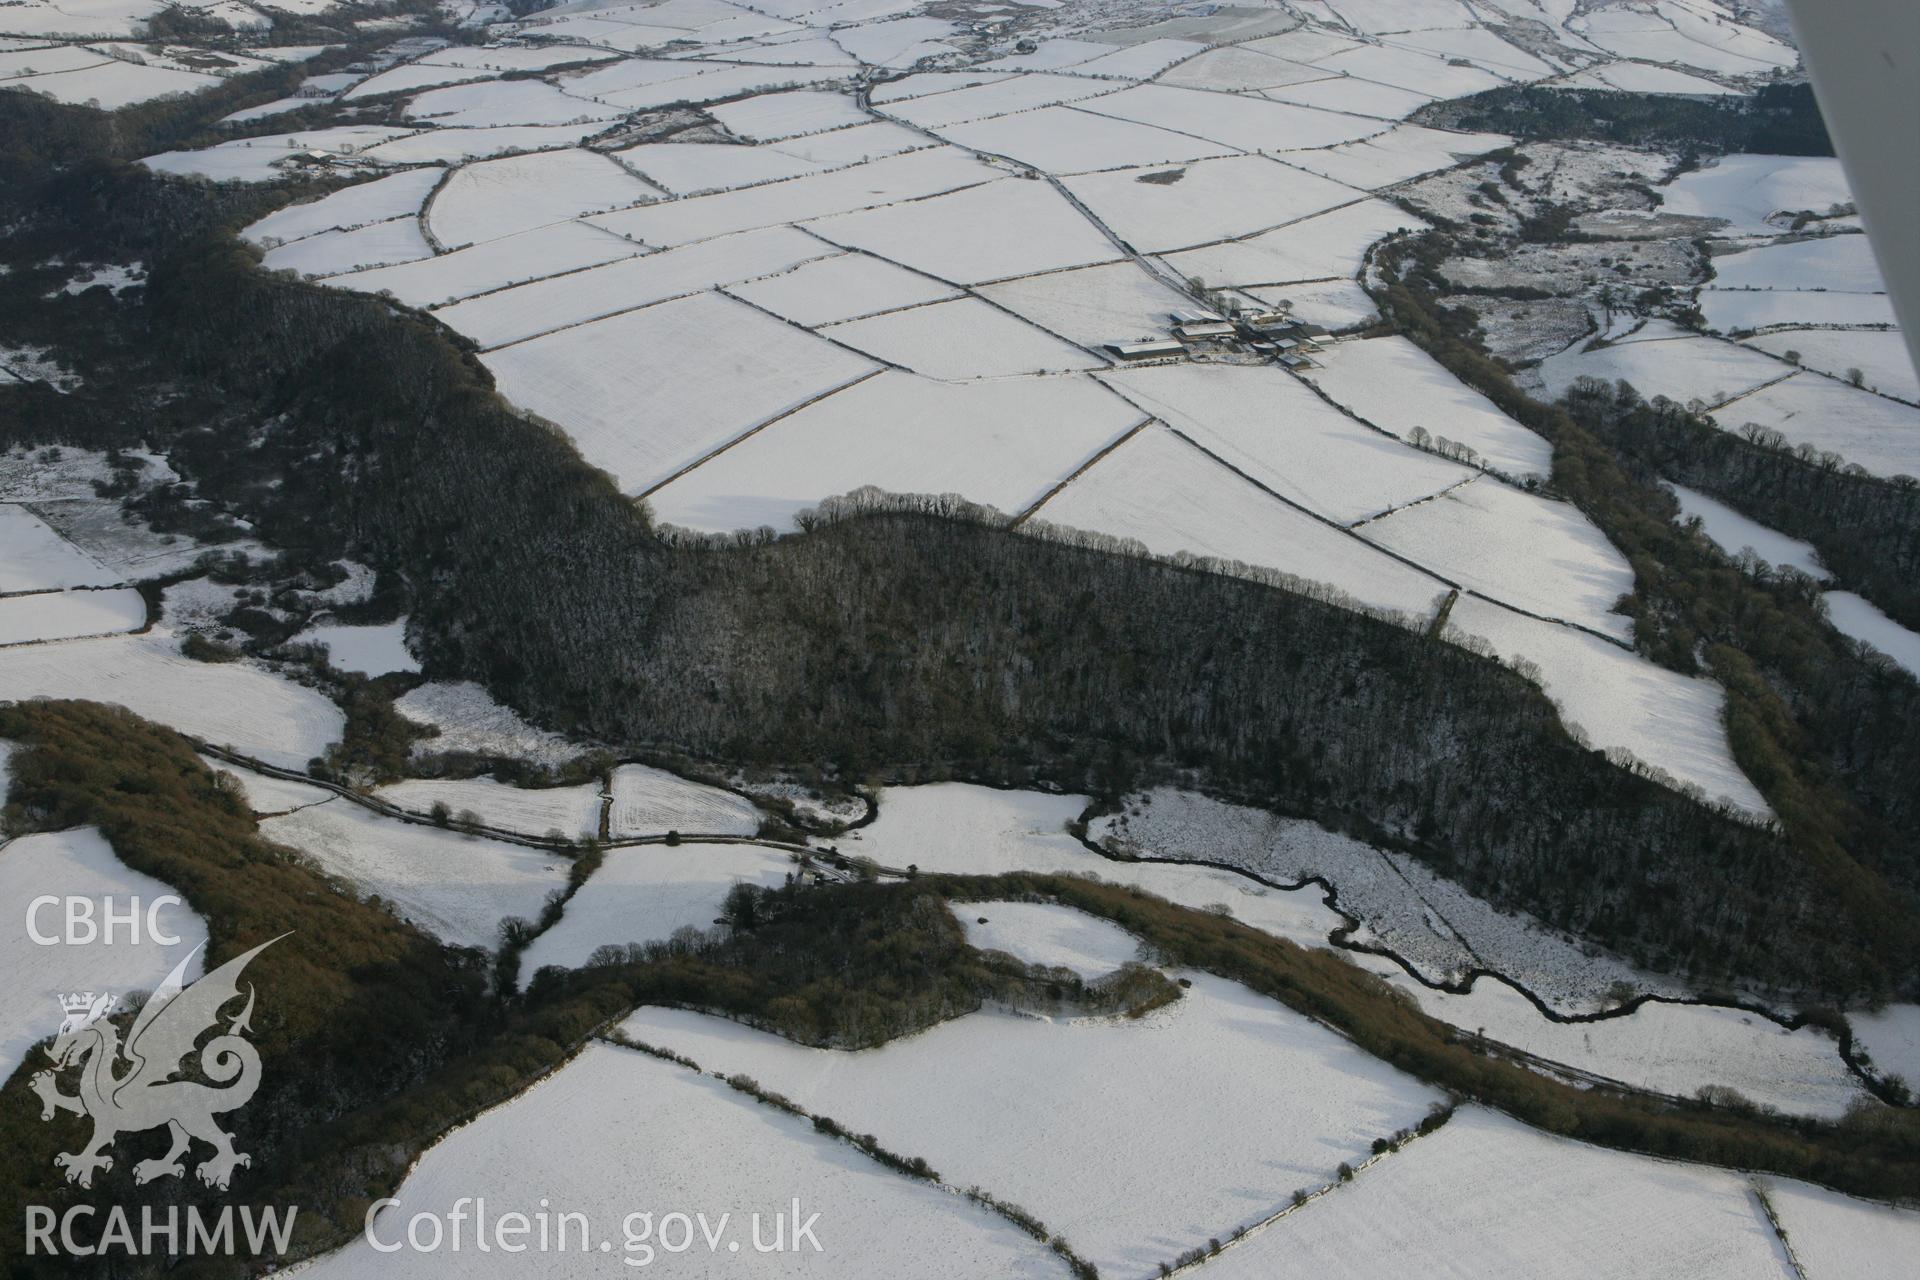 RCAHMW colour oblique photograph of Castell Pengegin. Taken by Toby Driver on 02/12/2010.